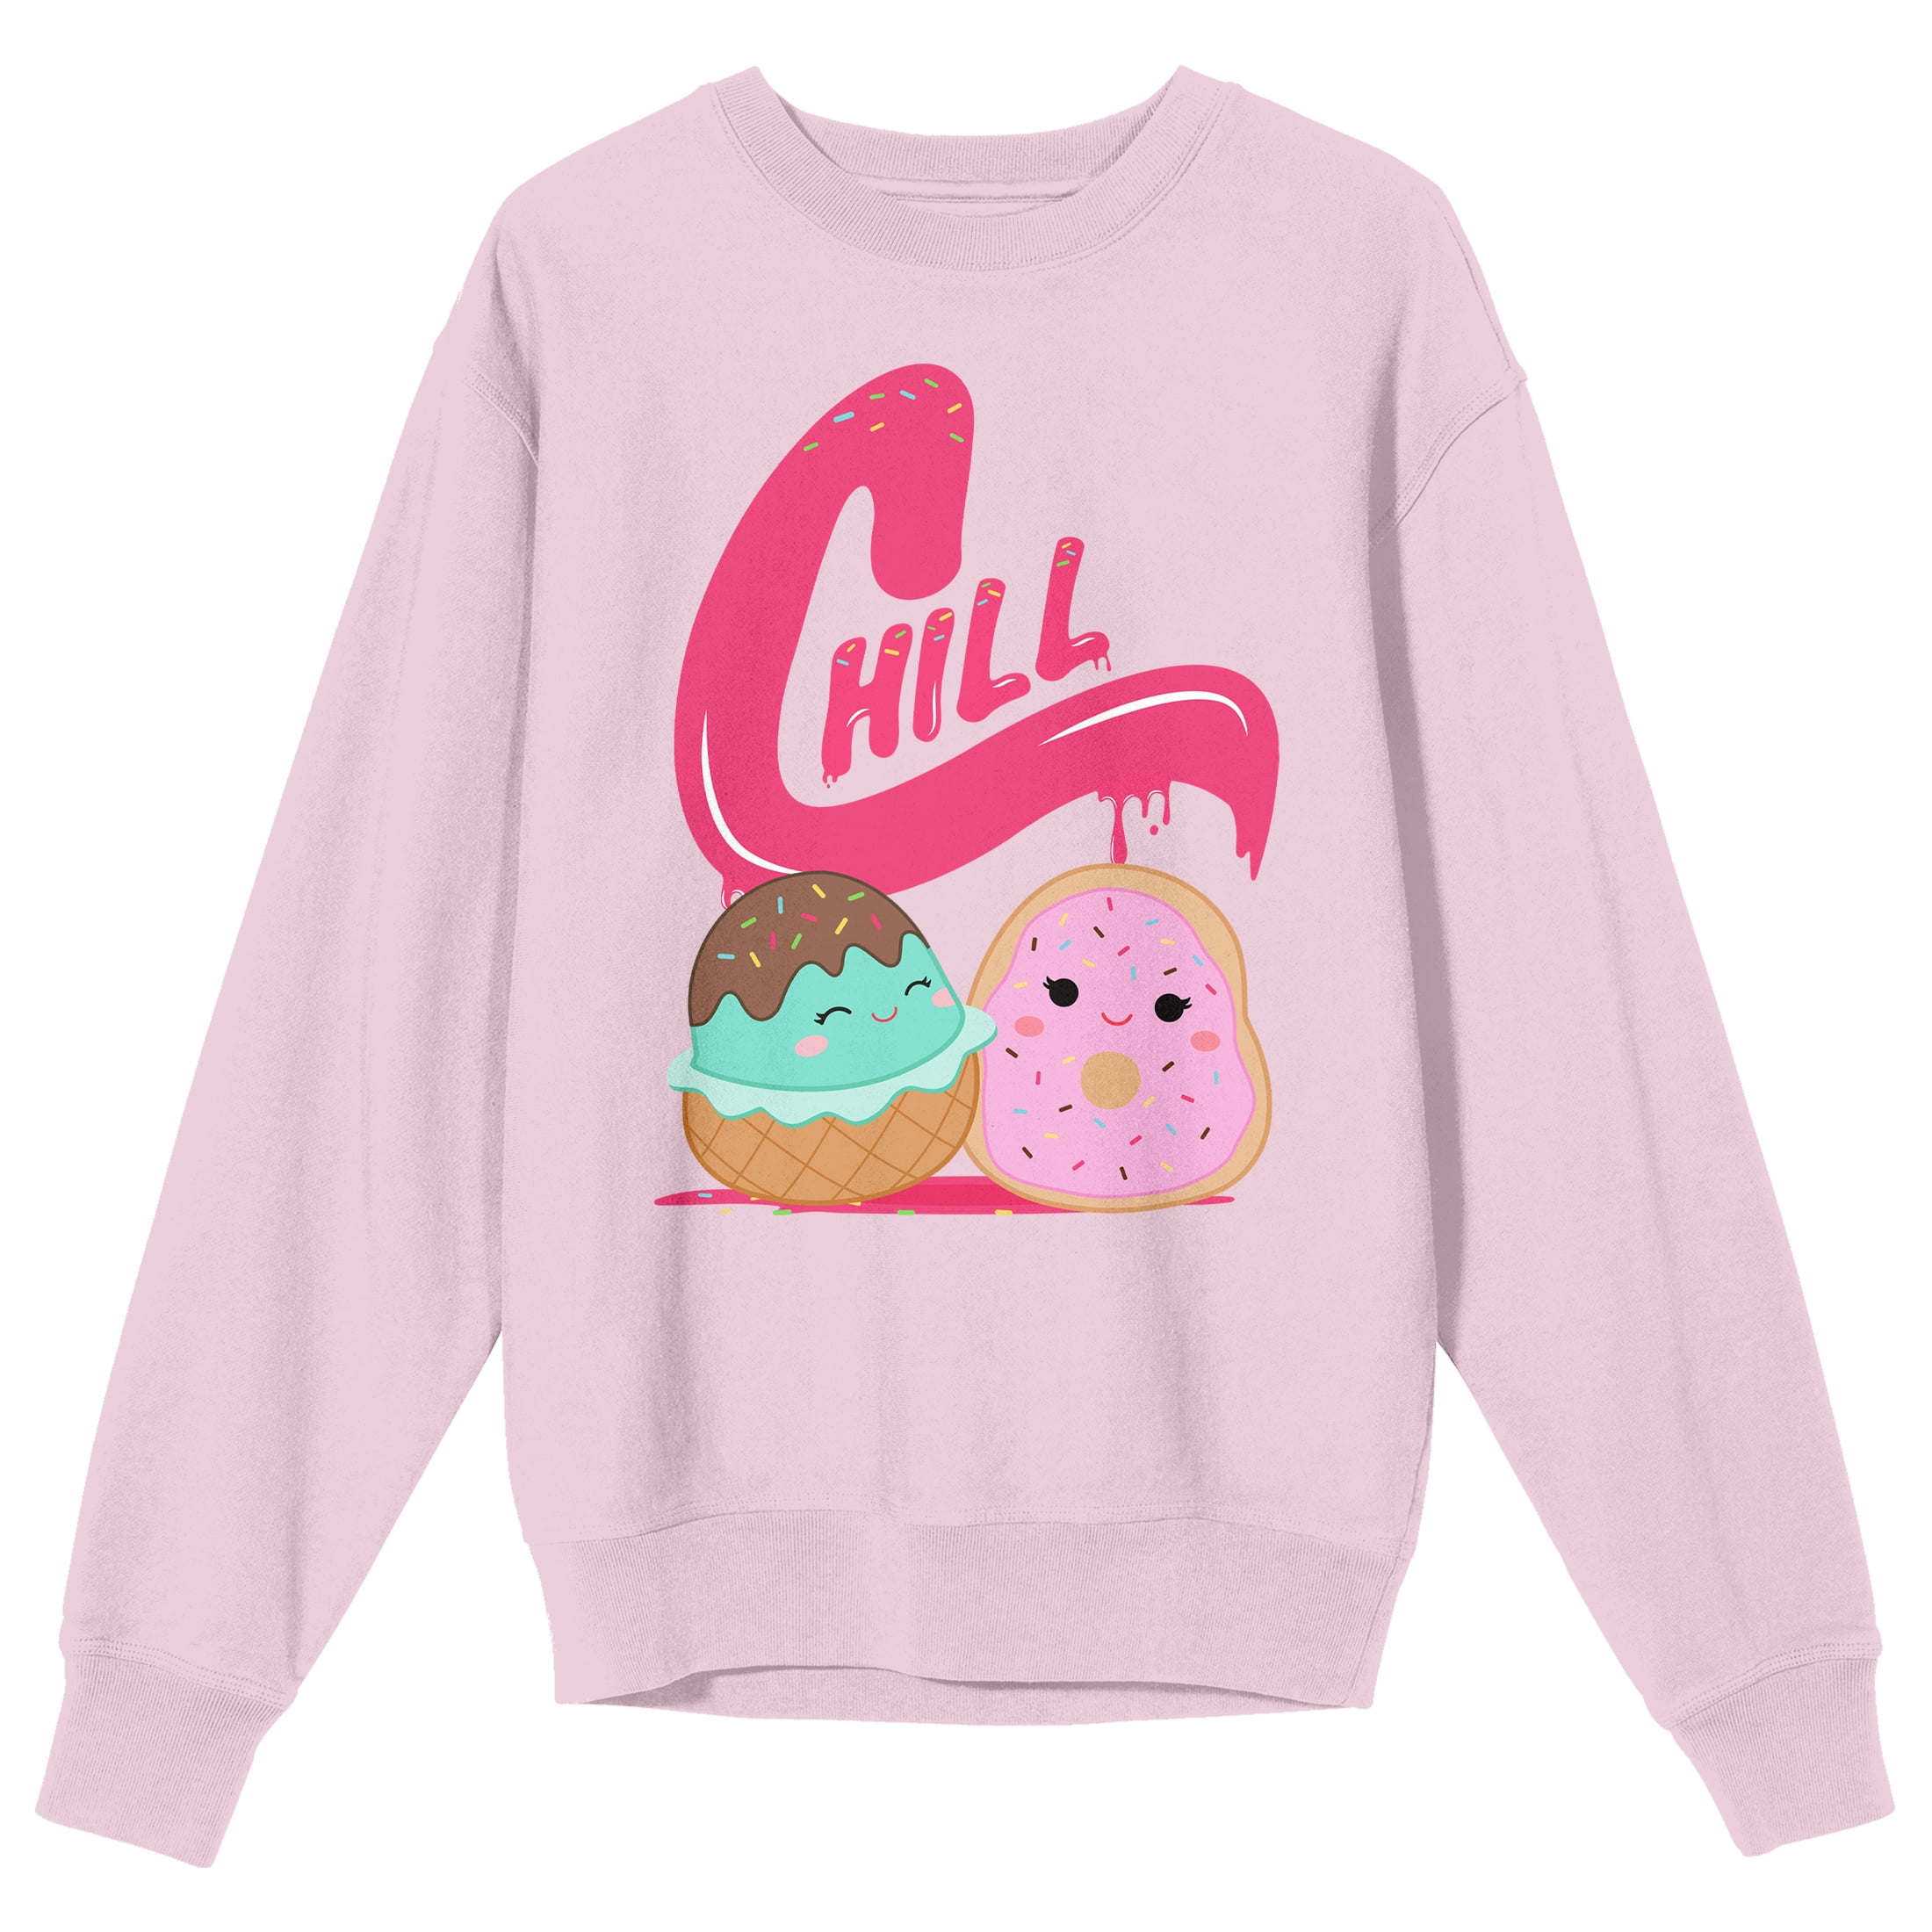 Squishmallows Chill Crew Neck Long Sleeve Cradle Pink Youth Sweatshirt-XXL  